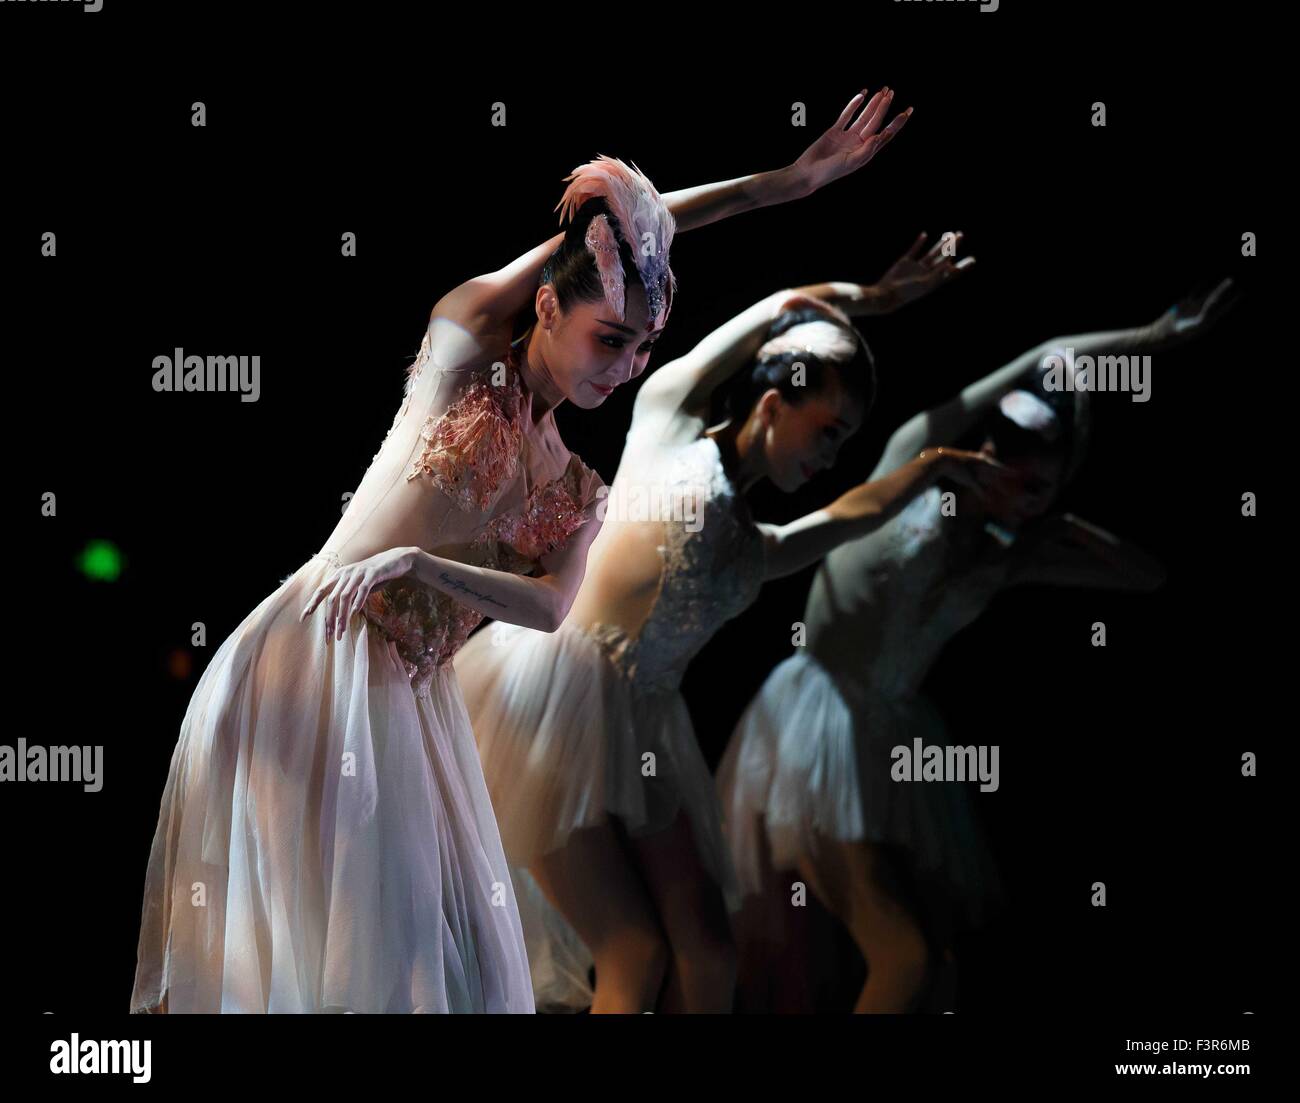 Nantong, China's Jiangsu Province. 11th Oct, 2015. Dancers perform dance drama 'Crested Ibis' in Nantong, east China's Jiangsu Province, Oct. 11, 2015. The dance drama shows the elegance of Crested Ibis, an endangered species, and calls for animal protection. Credit:  Huang Zhe/Xinhua/Alamy Live News Stock Photo